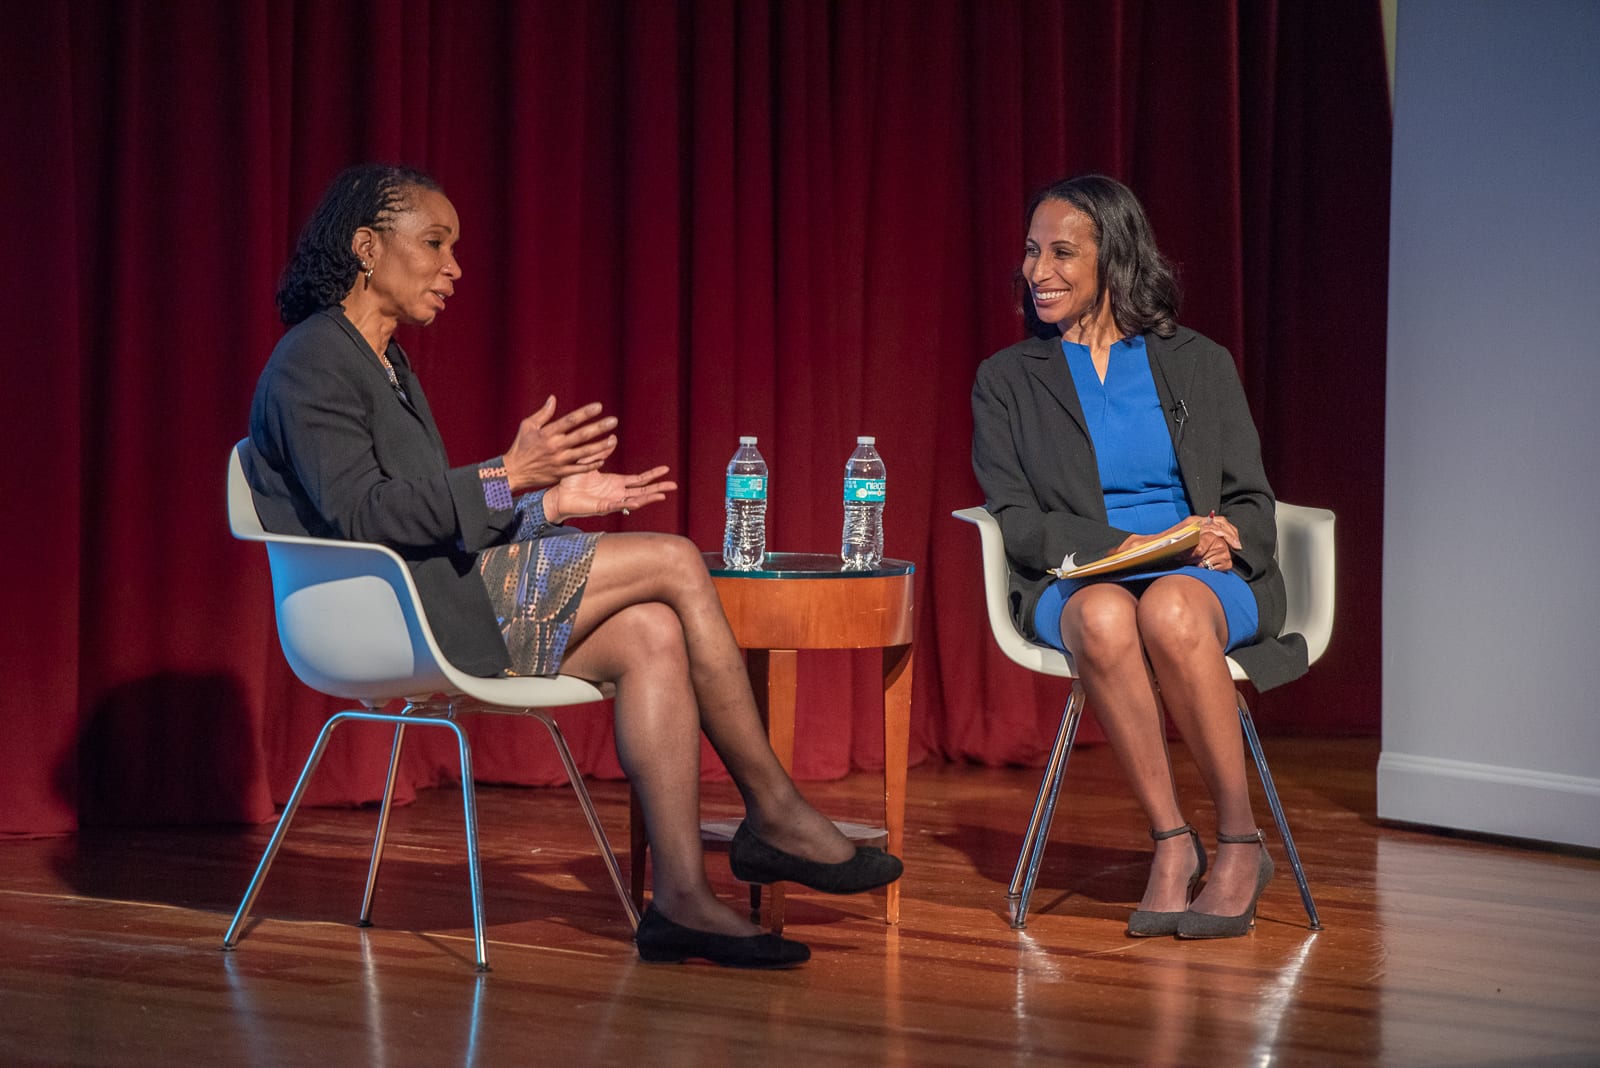 Dr. Helene Gayle and Dr. Una Osili discuss social impact, diversity, and philanthropy at the first event of the Diversity Speaker Series.